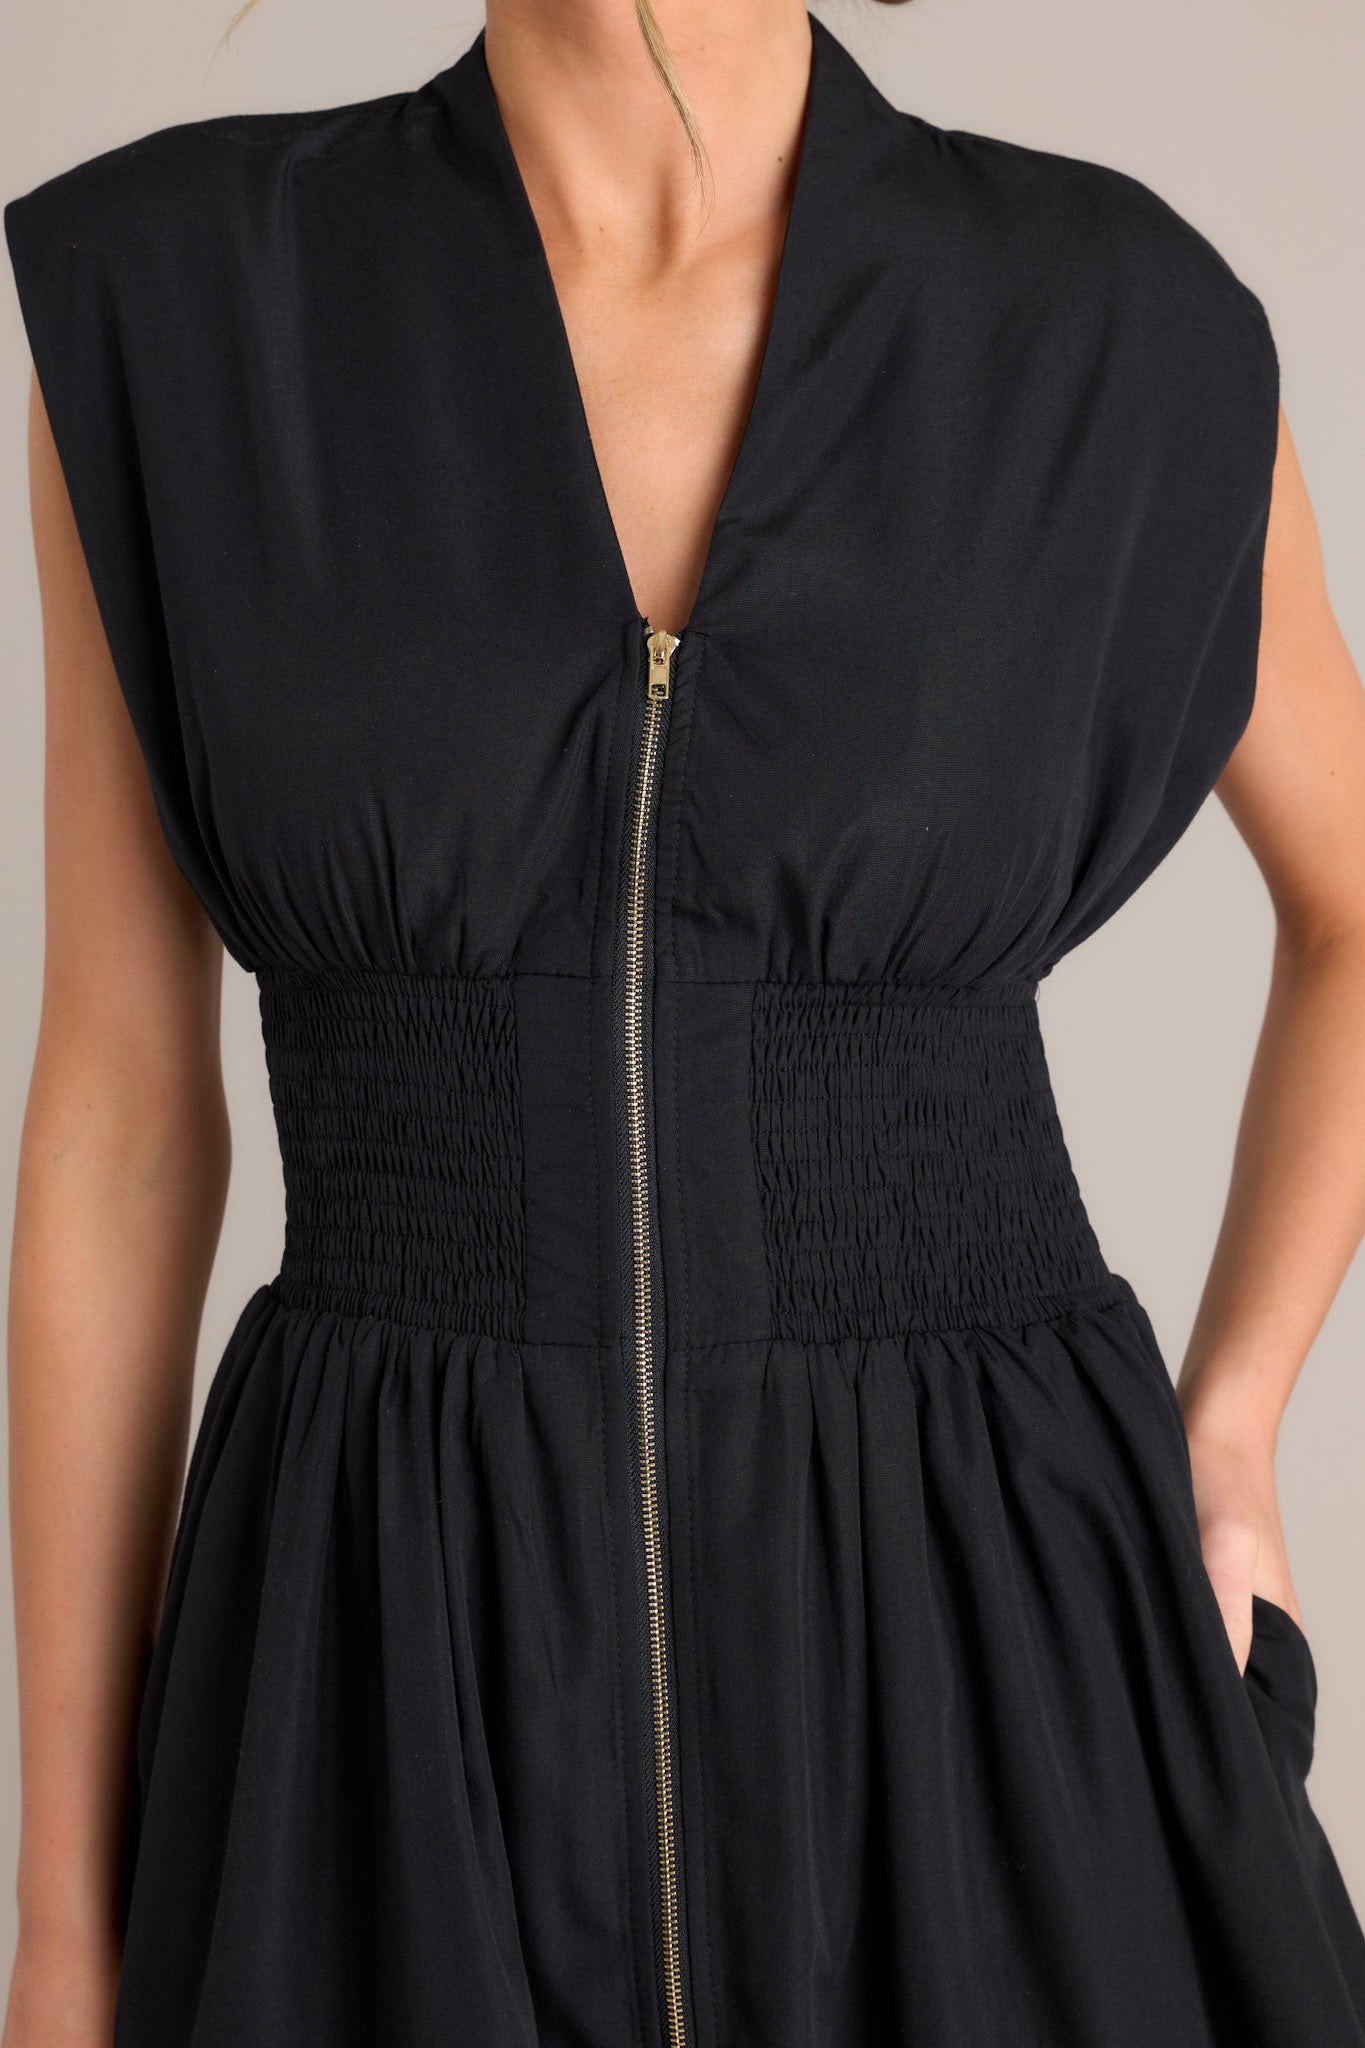 Close-up of the black midi dress showing the v-neckline, padded shoulders, full zipper front, and smocked waist.